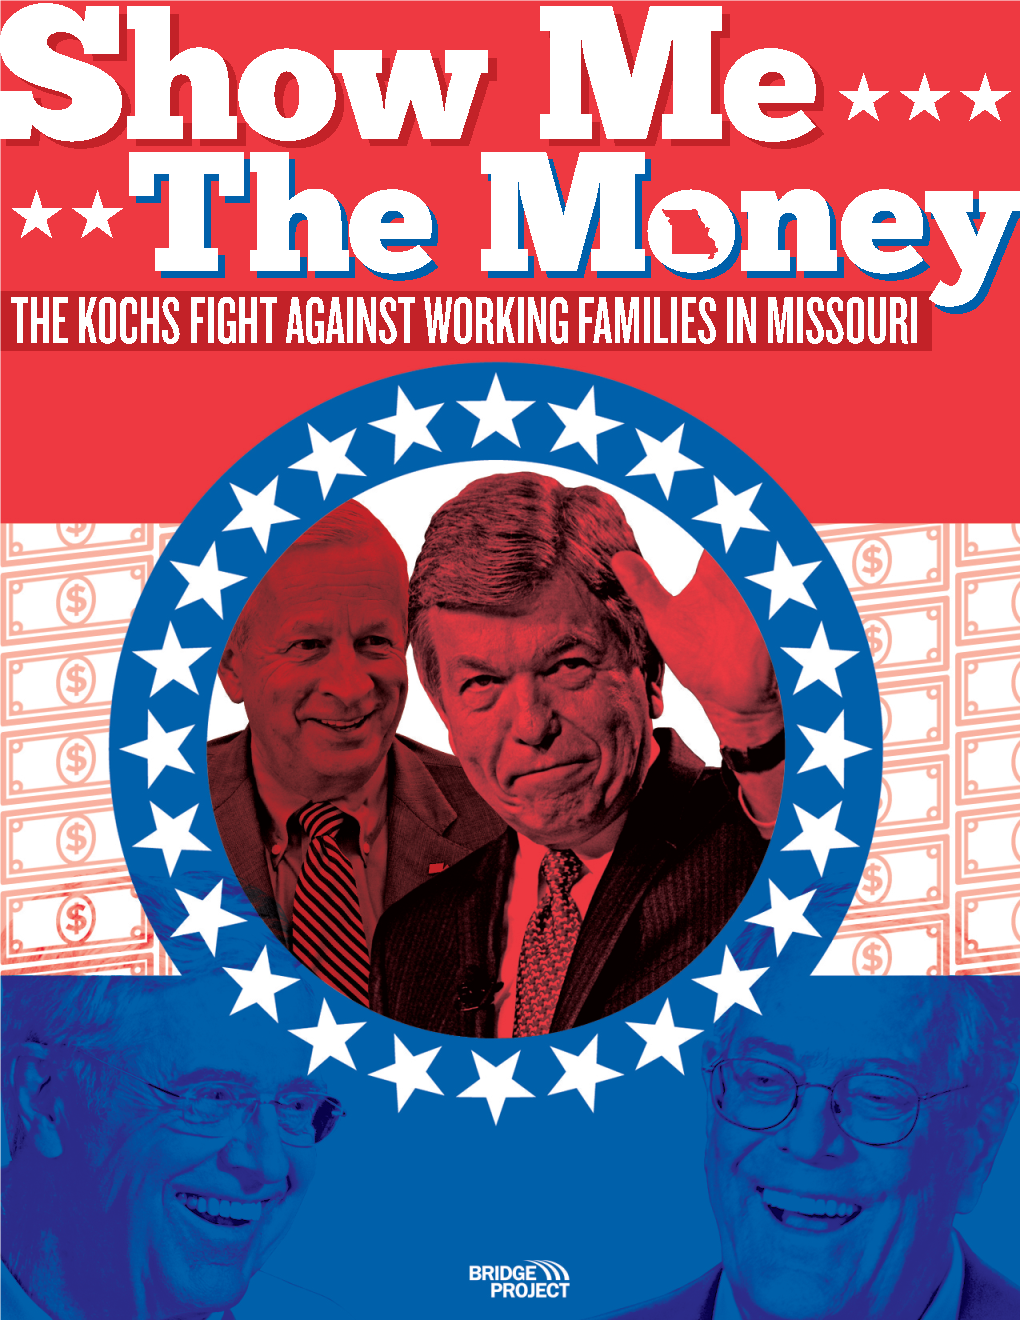 The Kochs Fight Against Working Families in Missouri